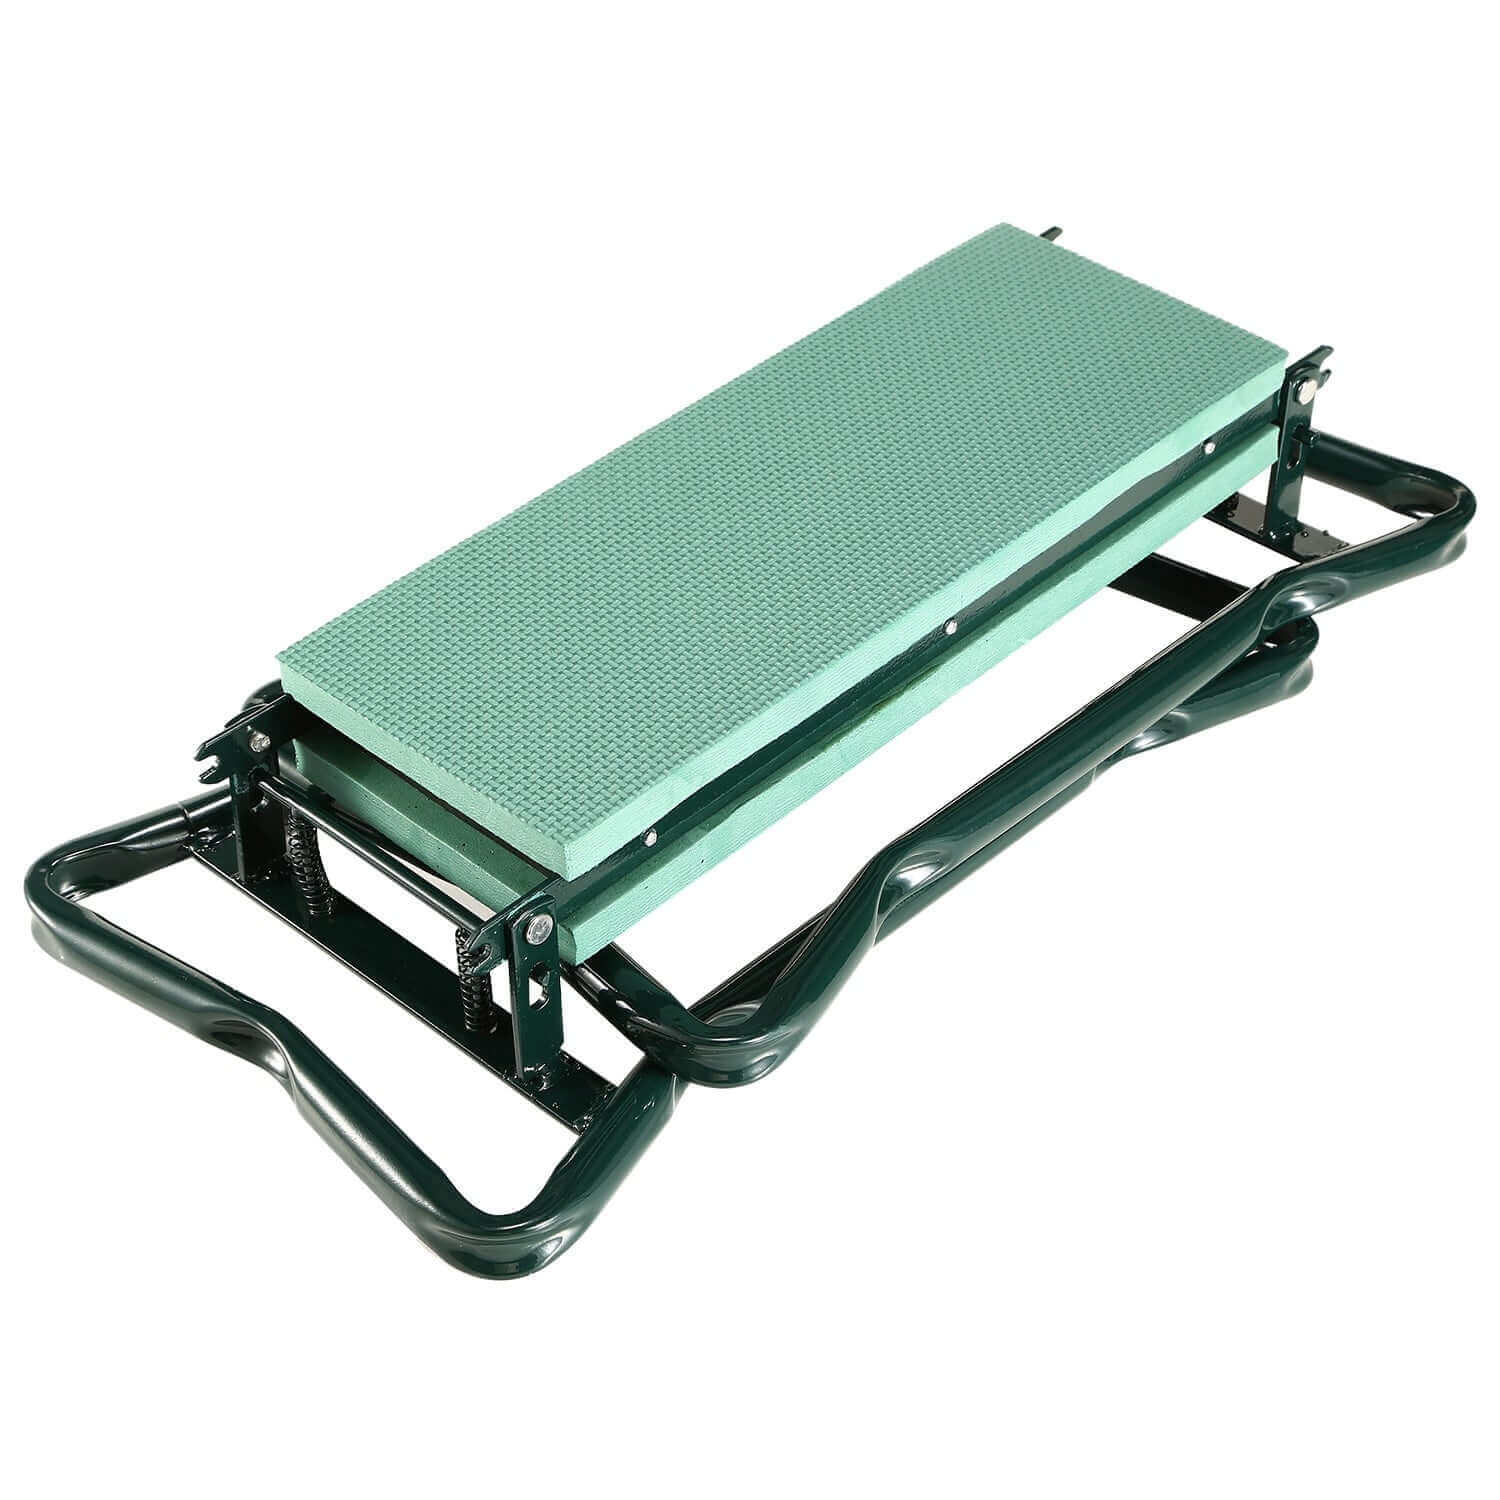 Foldable Garden Kneeler and Seat - 7